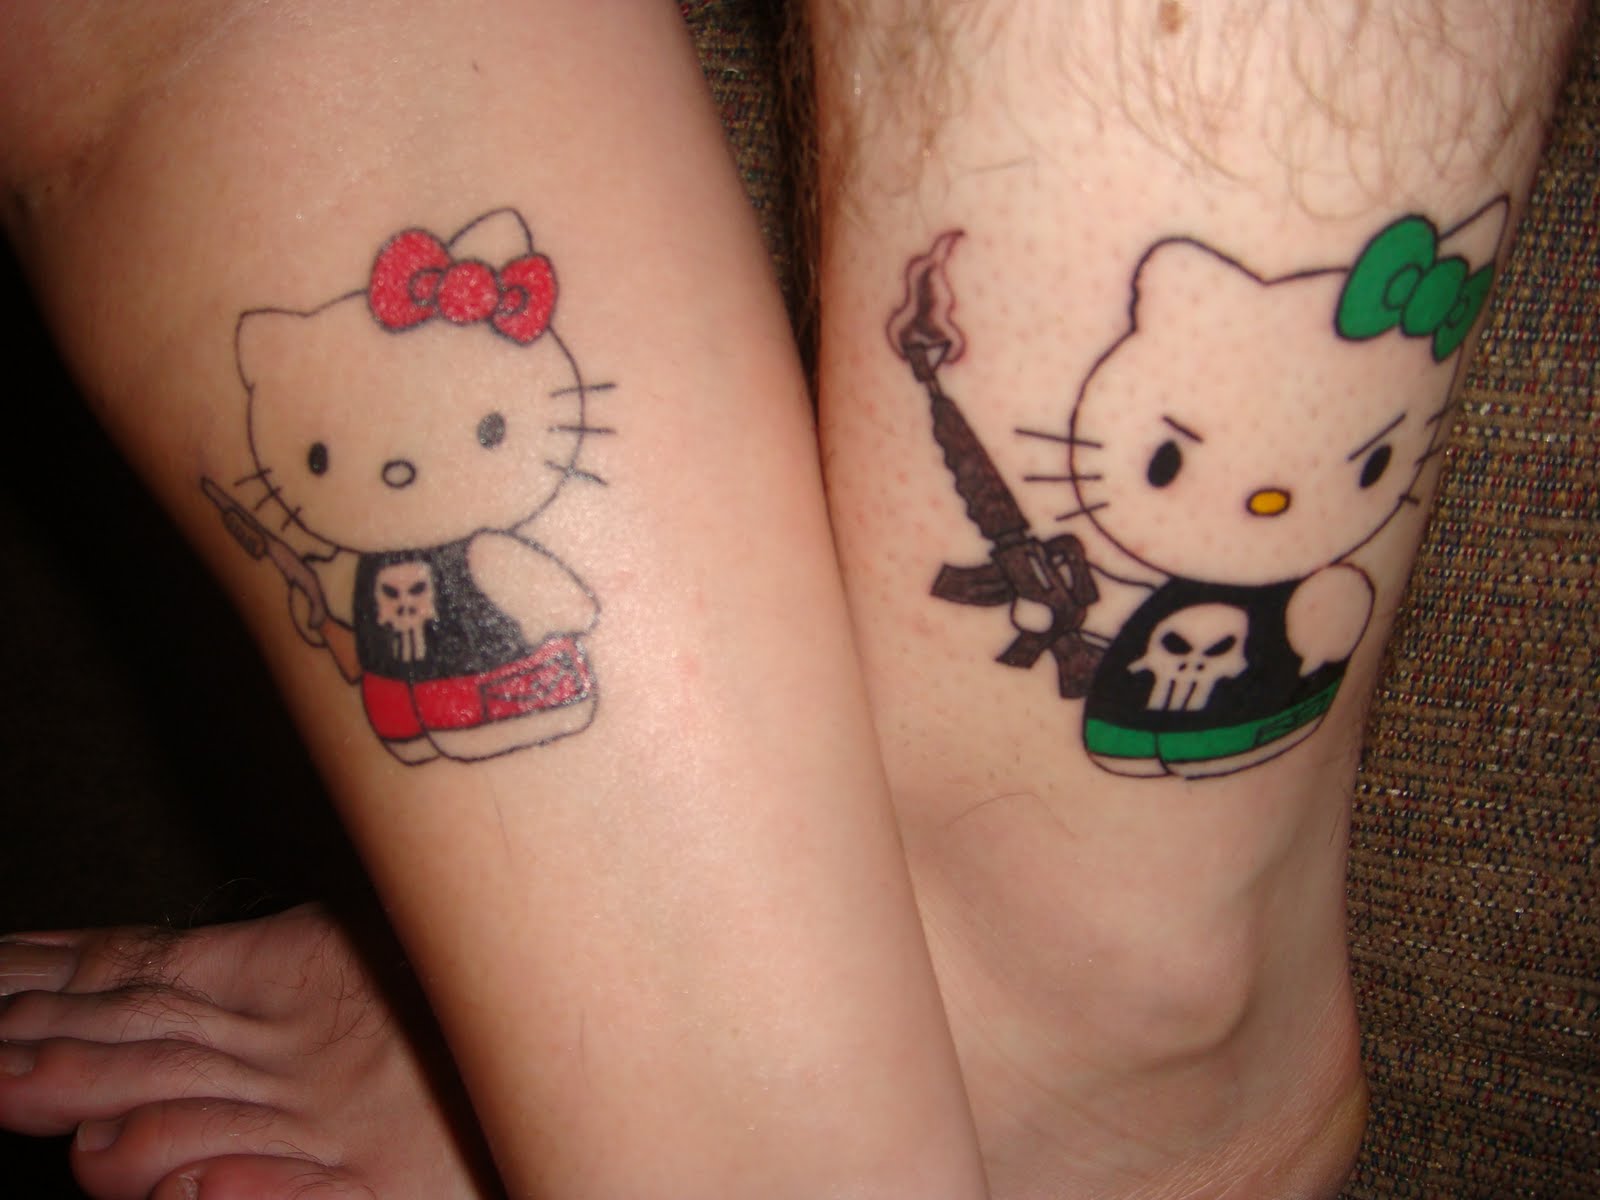 3. "Matching Tribal Couple Tattoos" - wide 2